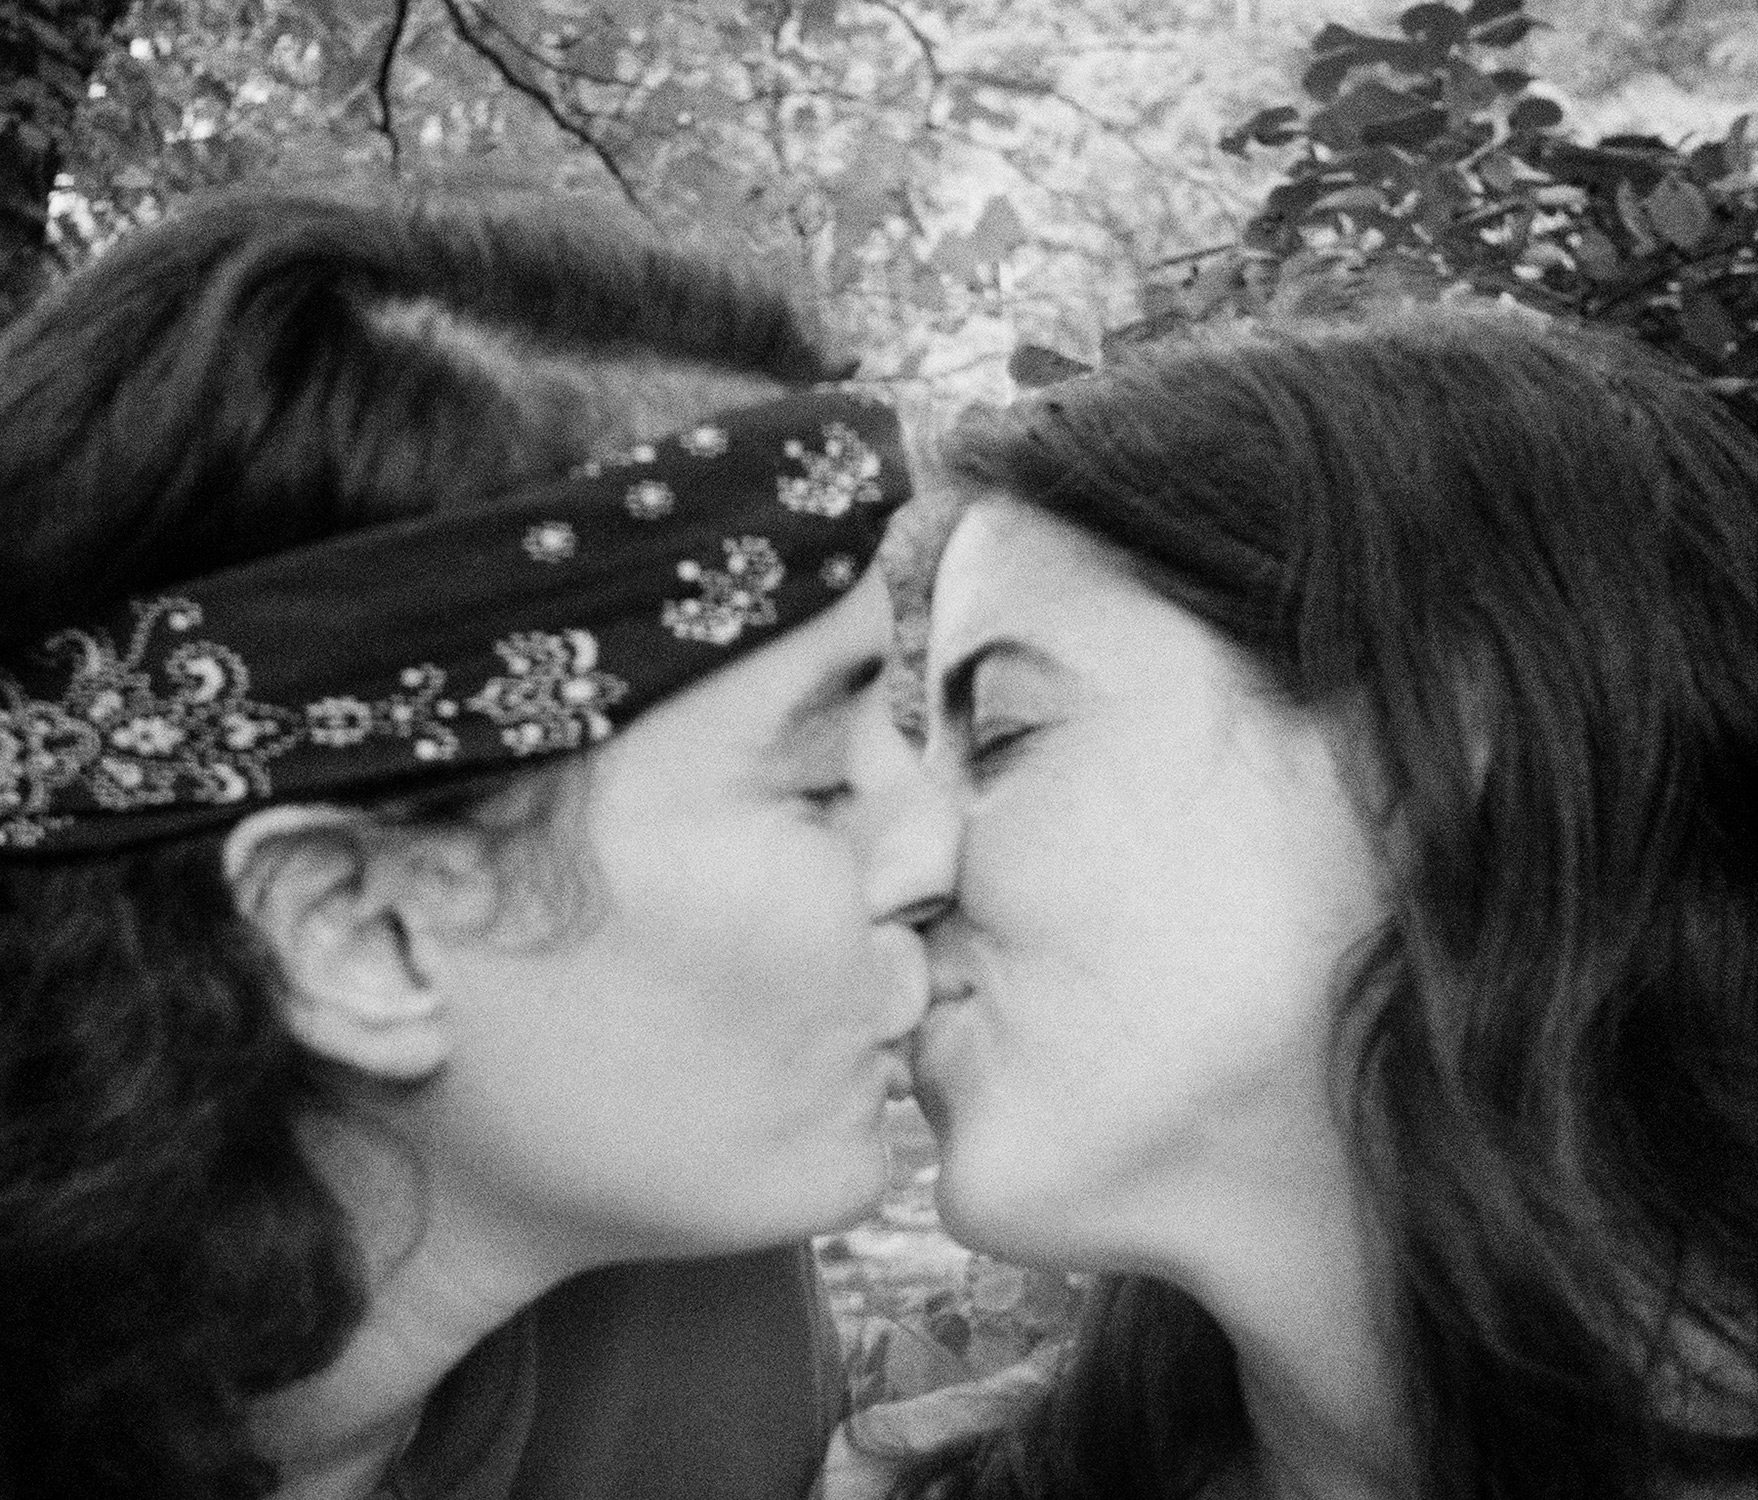 Self Portrait with Sharon, circa 1970. "I had never seen a picture of two women kissing and I wanted to see it", wrote Biren in the introduction to 'Eye To Eye: Portraits of Lesbians.' "That's my first lesbian photograph." (JEB (Joan E. Biren))